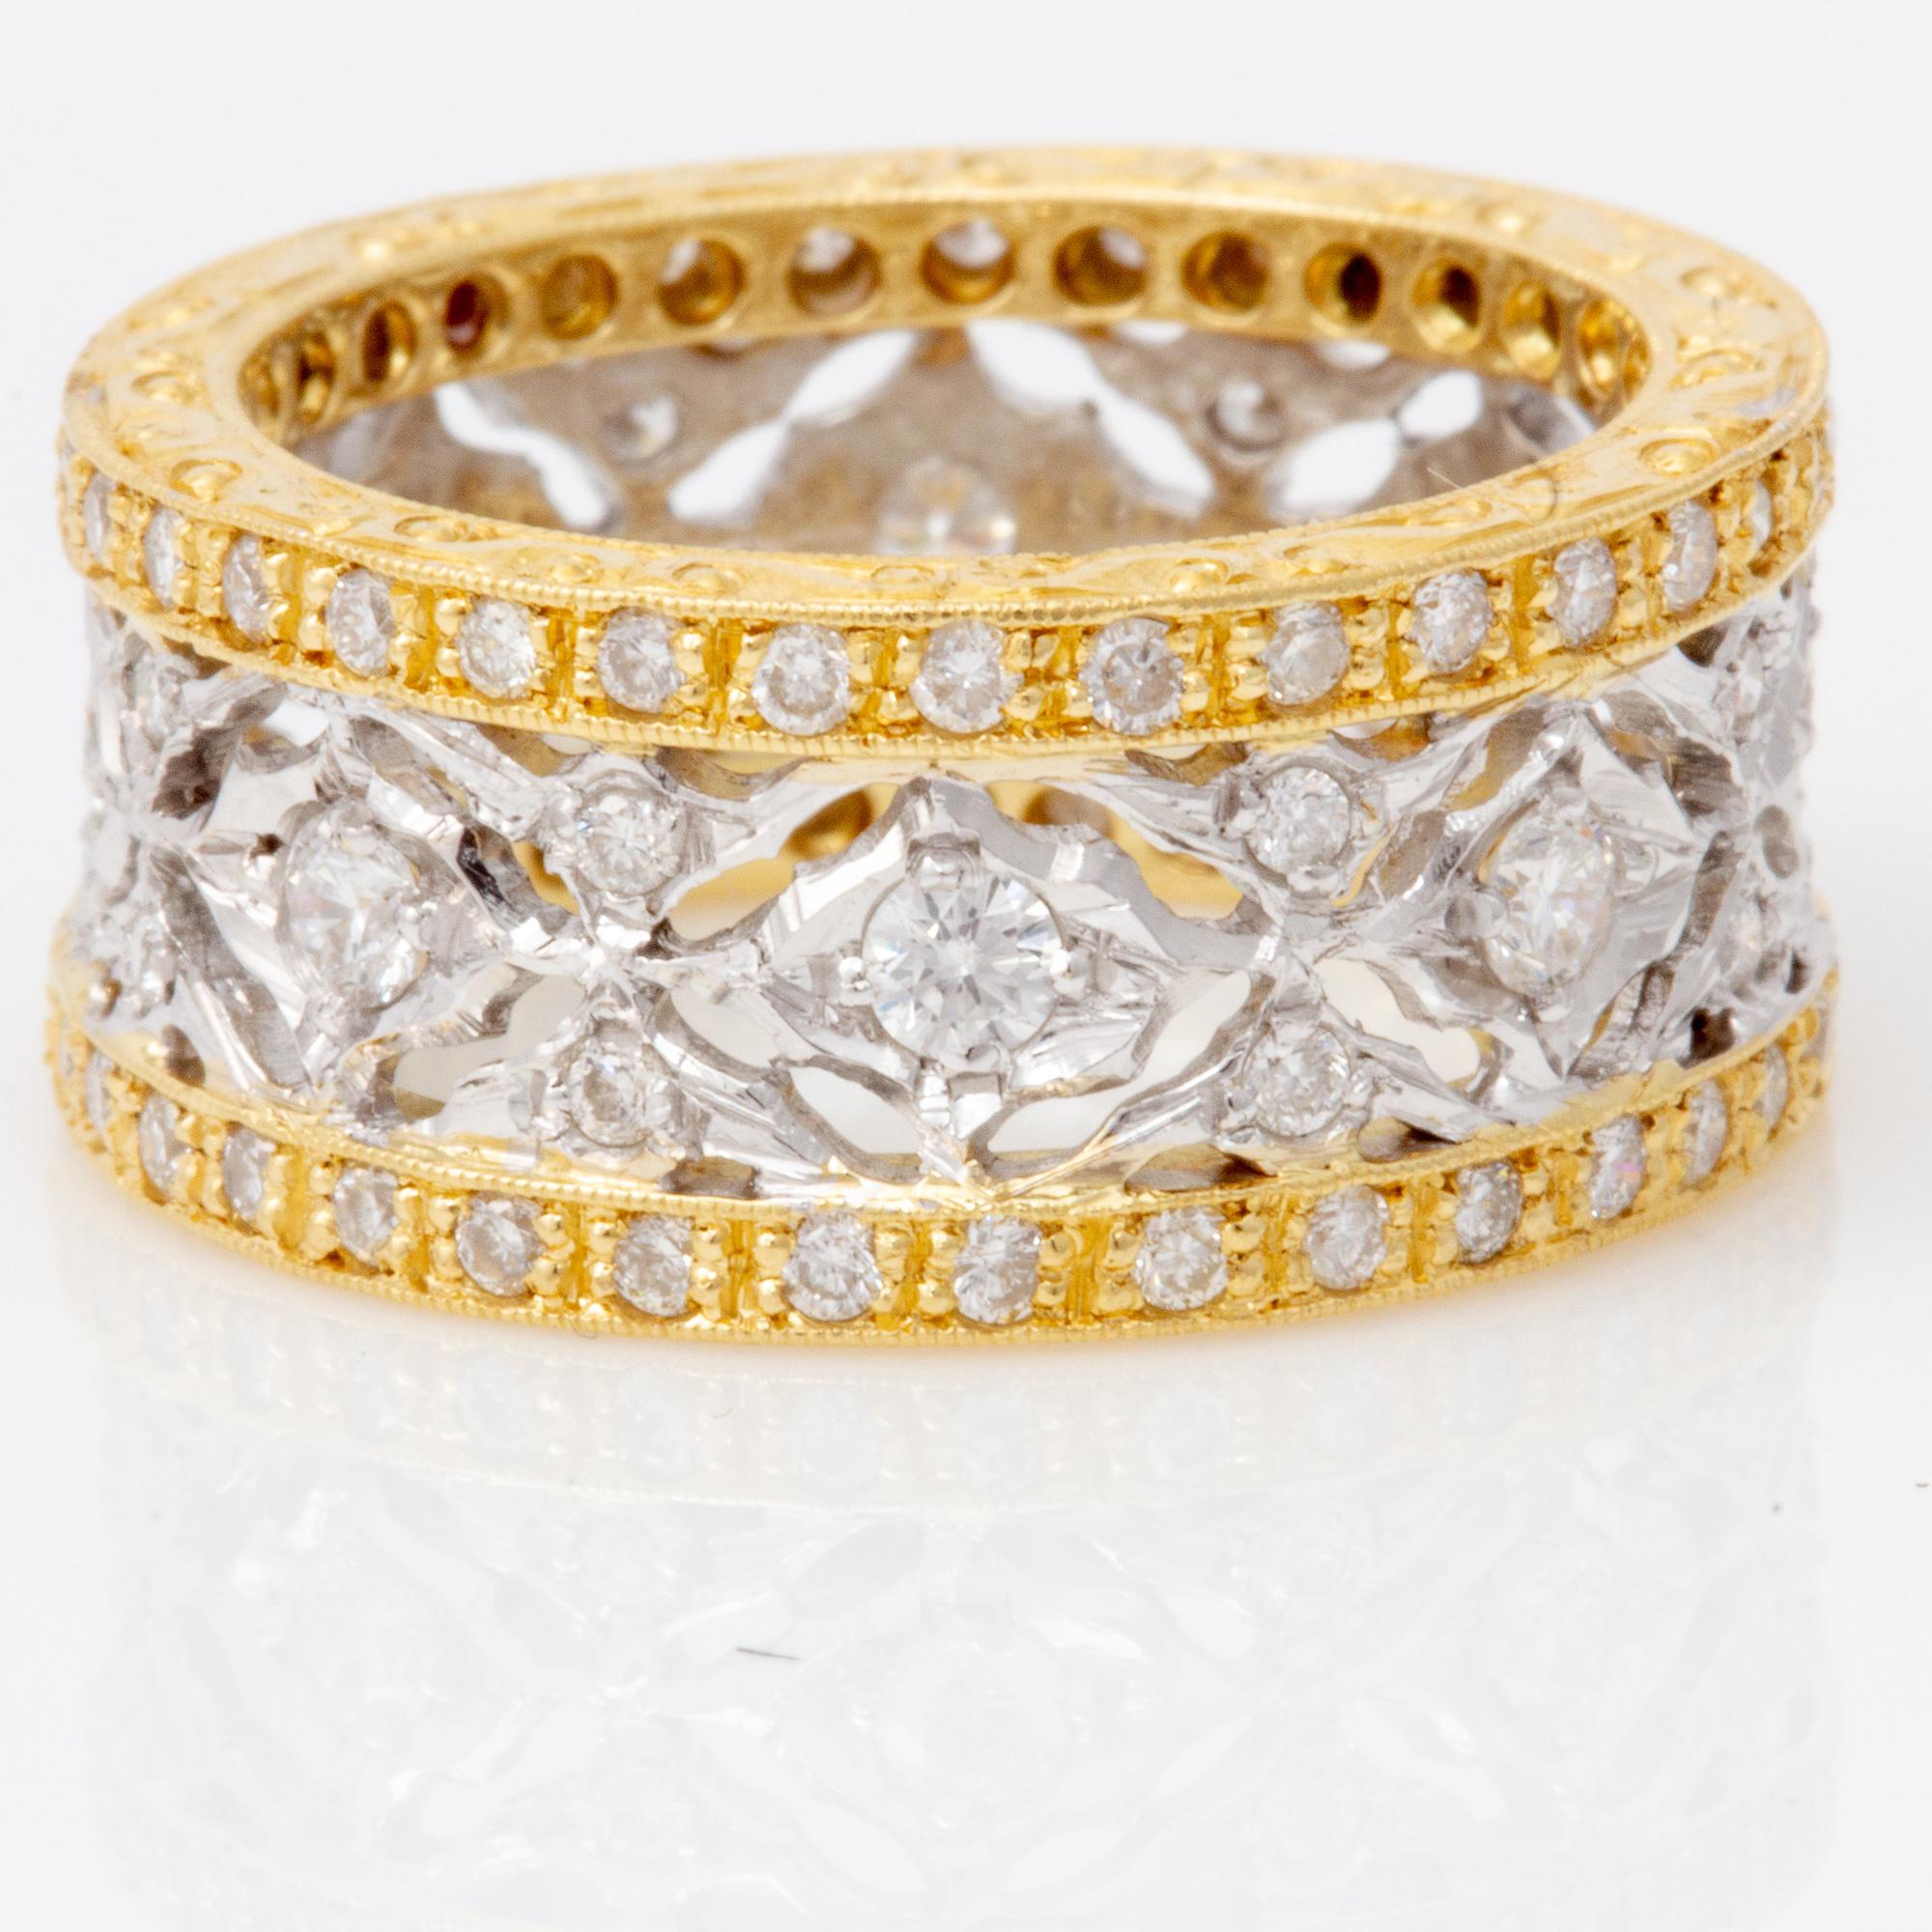 Hand-Engraved Two-Tone 18 Karat Gold and Diamond Ring For Sale 4